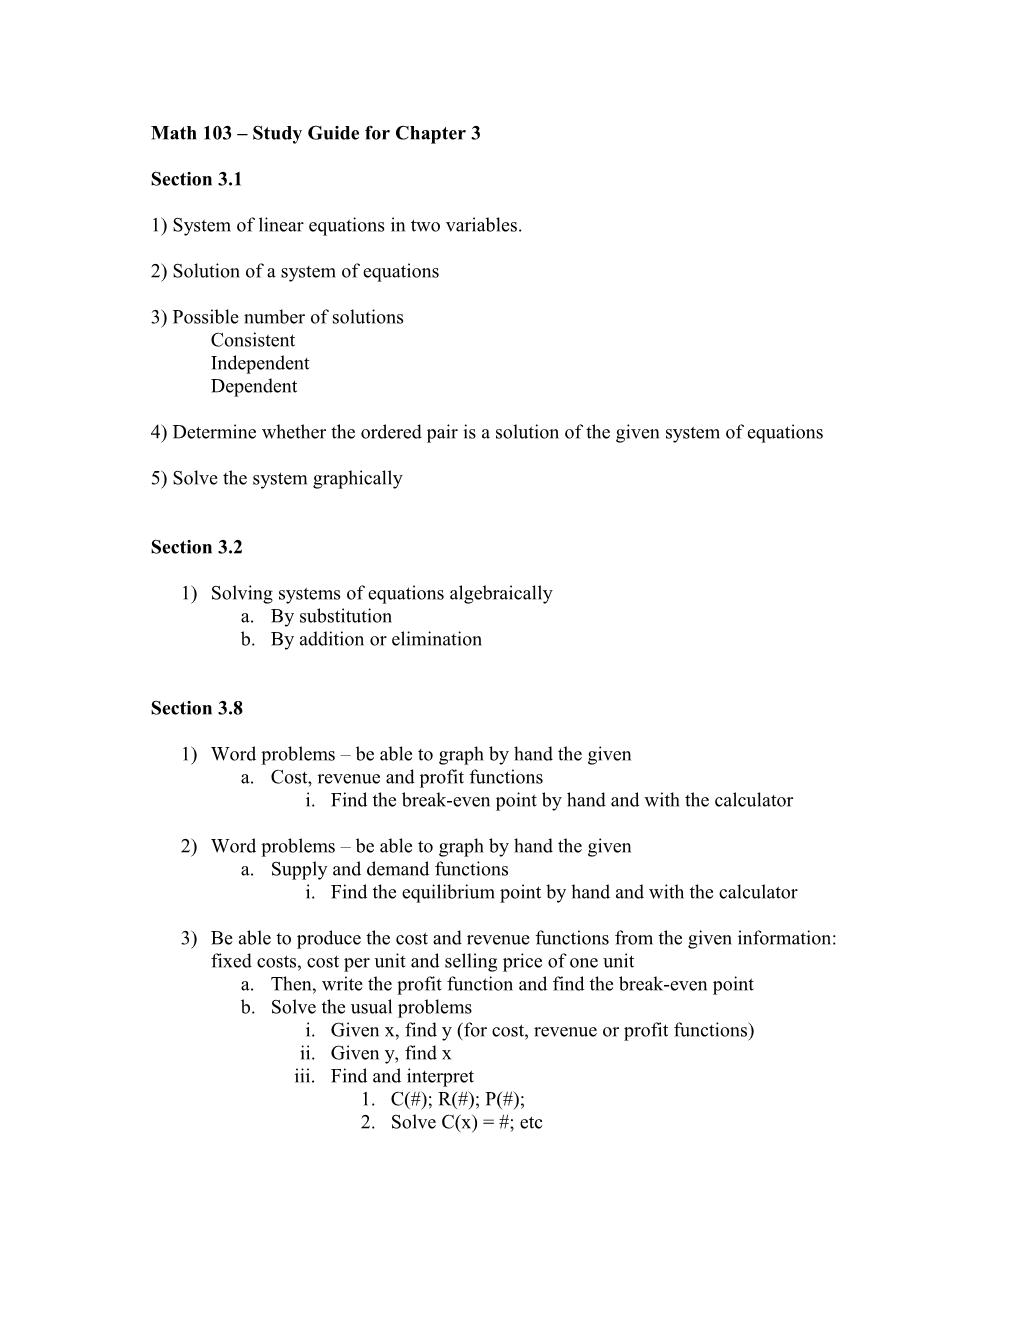 Math 103 Study Guide for Chapter 3